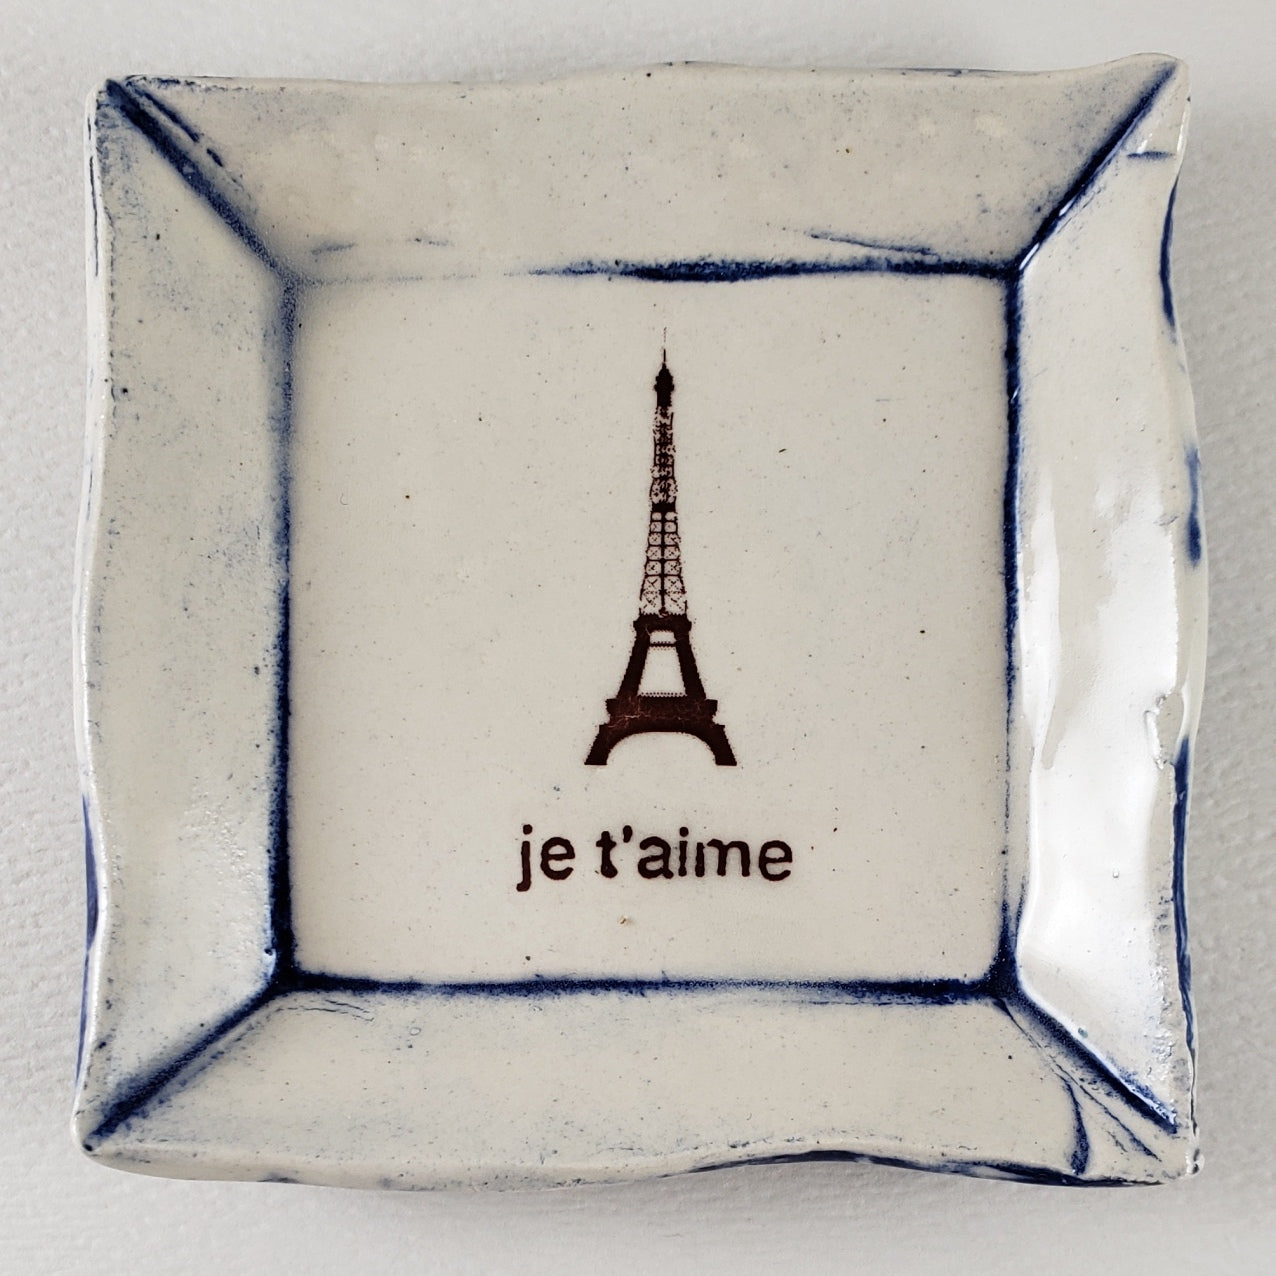 Tiny Plate with "Je T'aime" and the Eiffel Tower